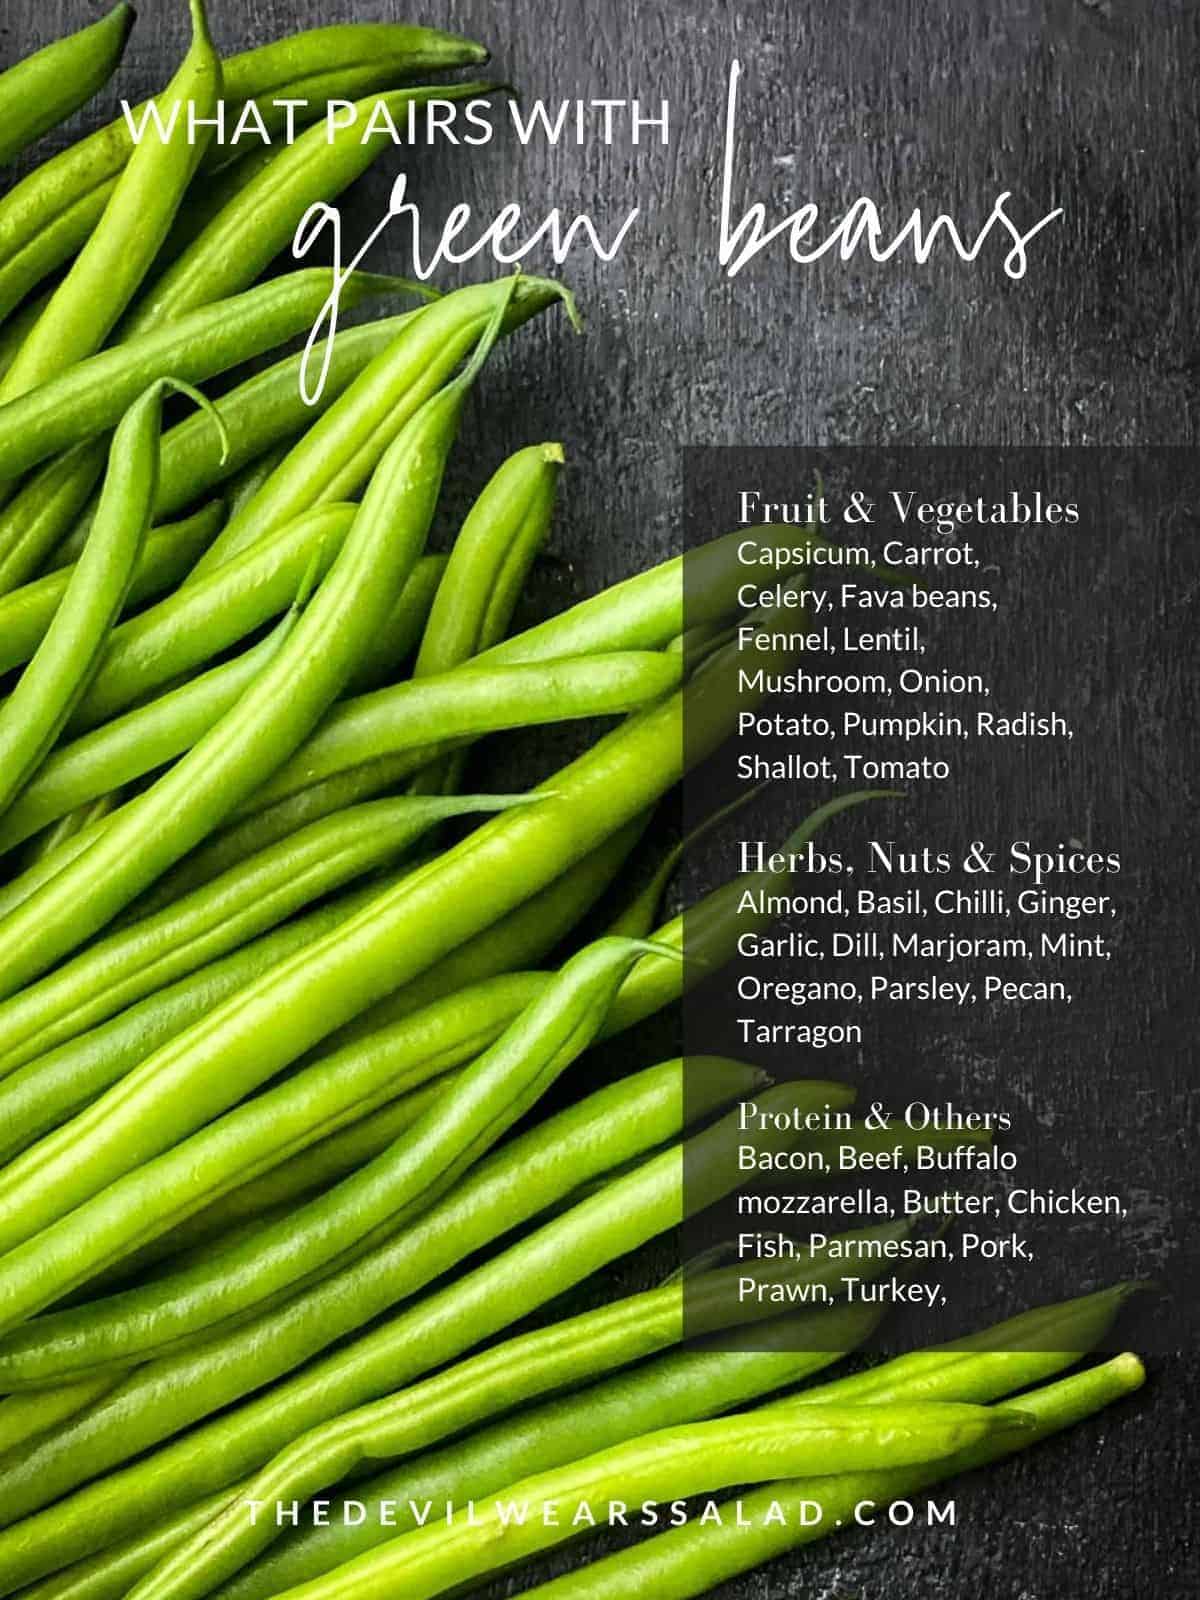 Lst of ingredients that goes well with green beans